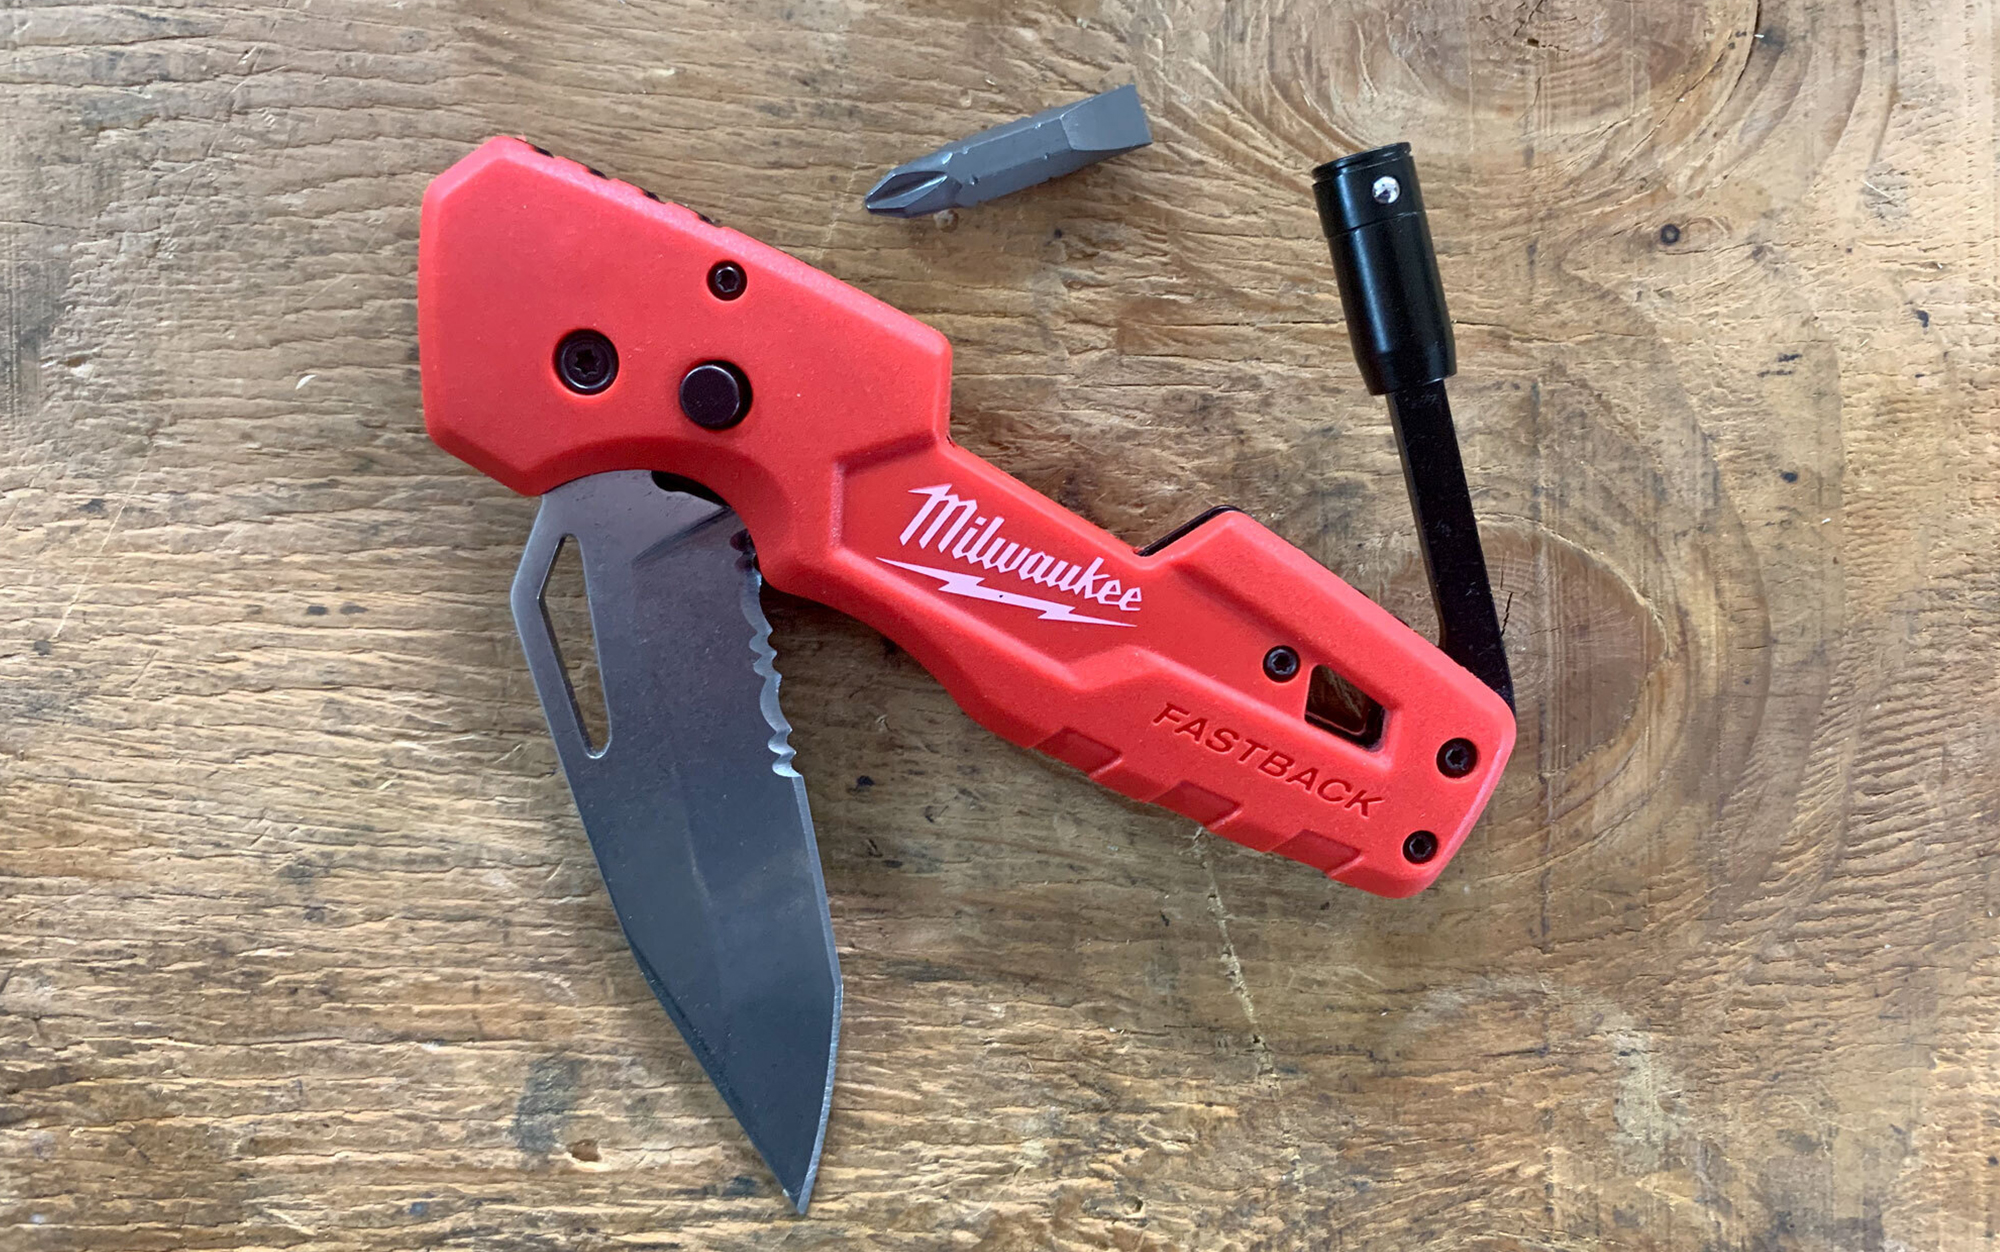 The Milwaukee Fastback 5-in-1 features a knife blade, fold-out ¼-inch bit driver, two-sided flat and Phillips bit, bottle opener, and flip-out blade with safety button.